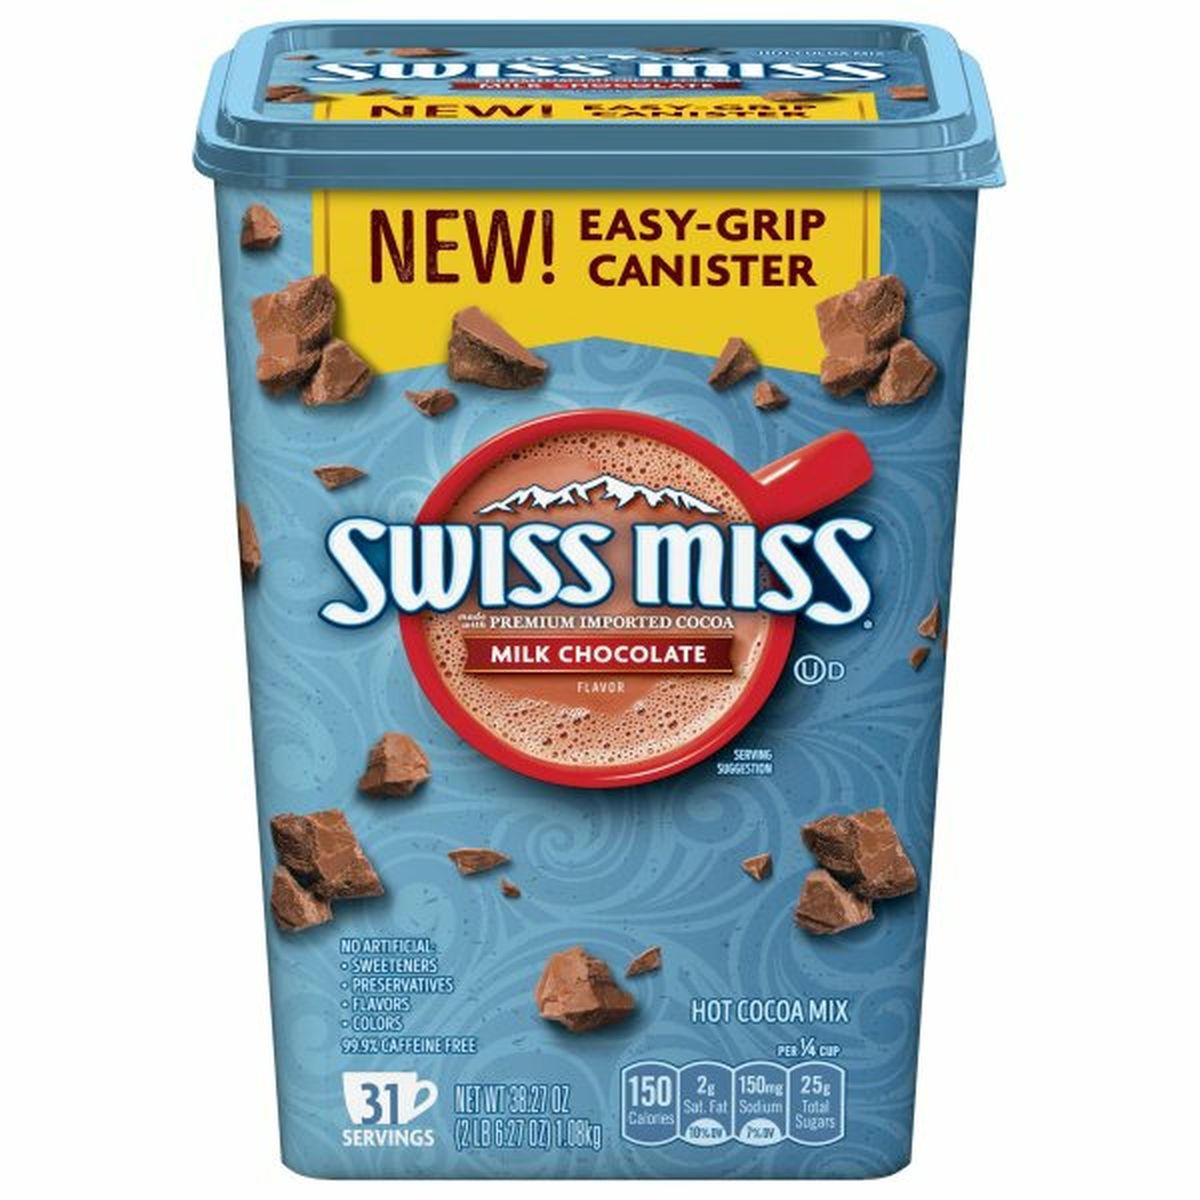 Calories in Swiss Miss Hot Cocoa Mix, Milk Chocolate Flavor